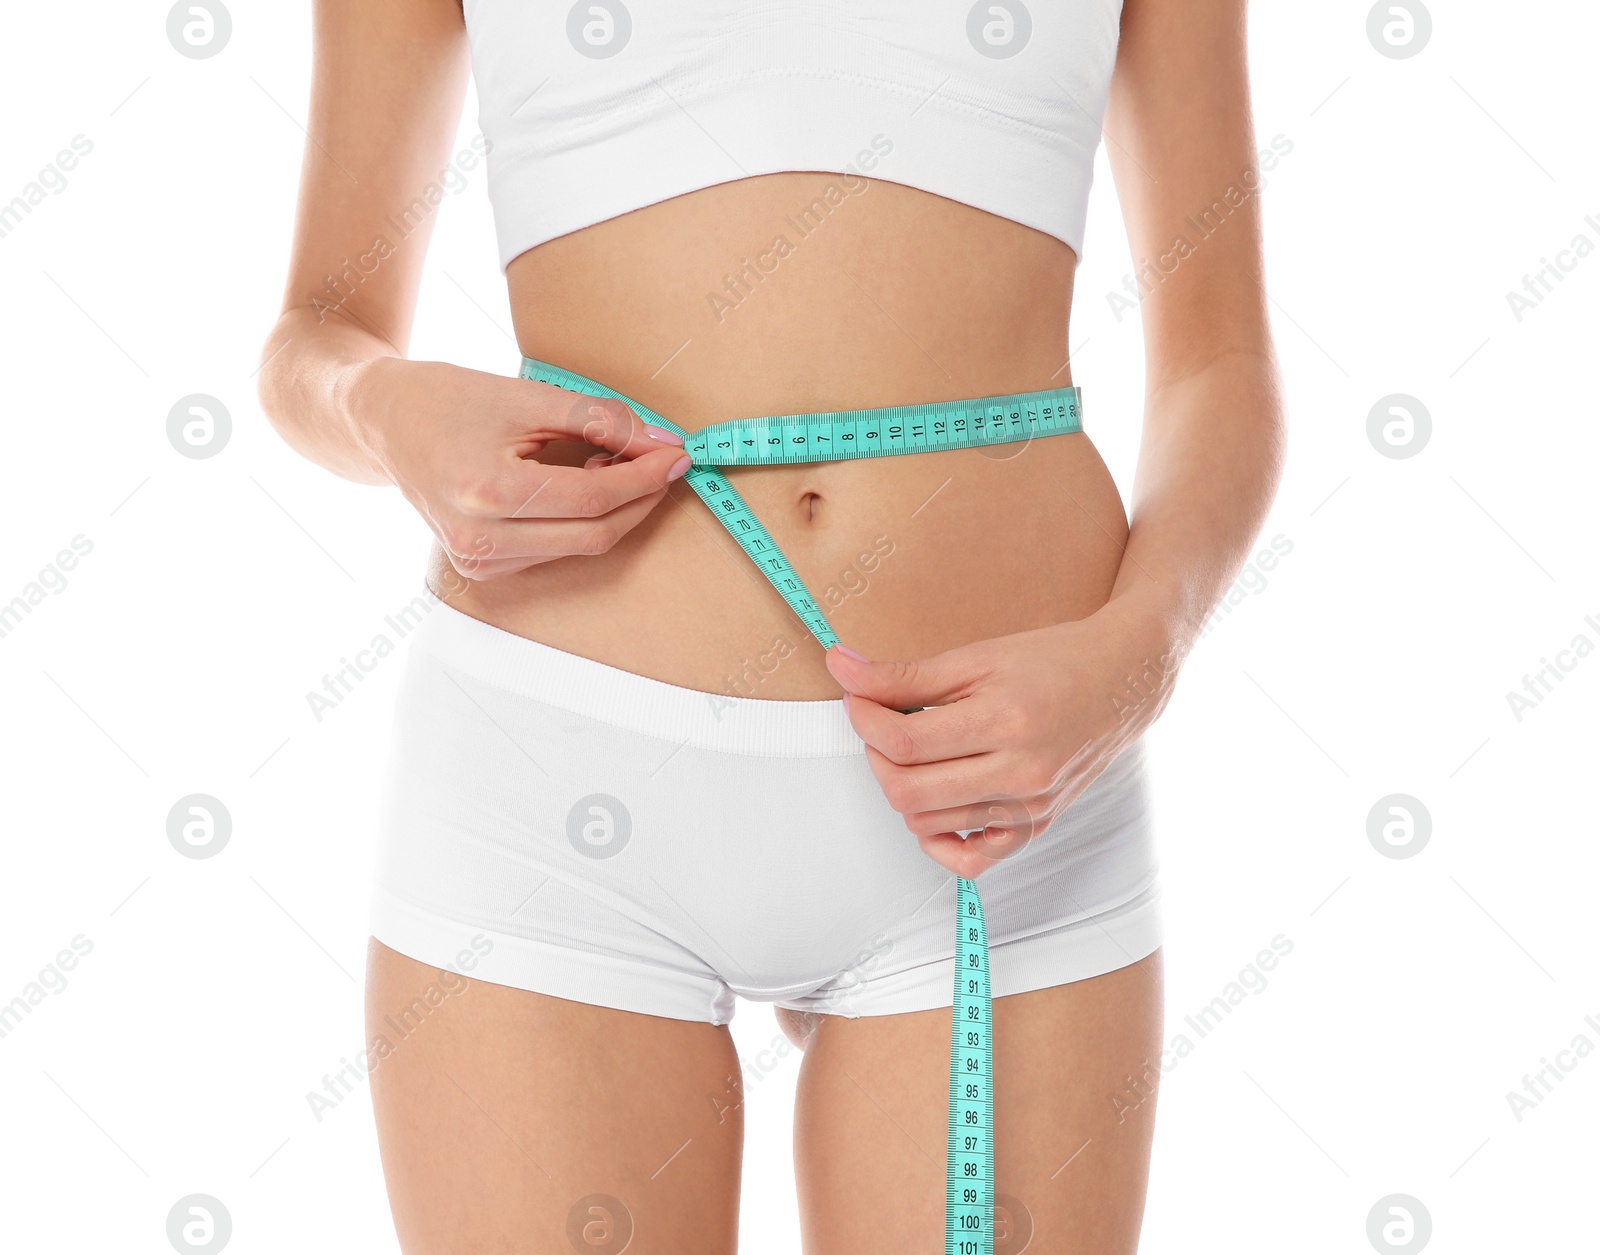 Photo of Slim woman measuring her waist on white background, closeup. Weight loss